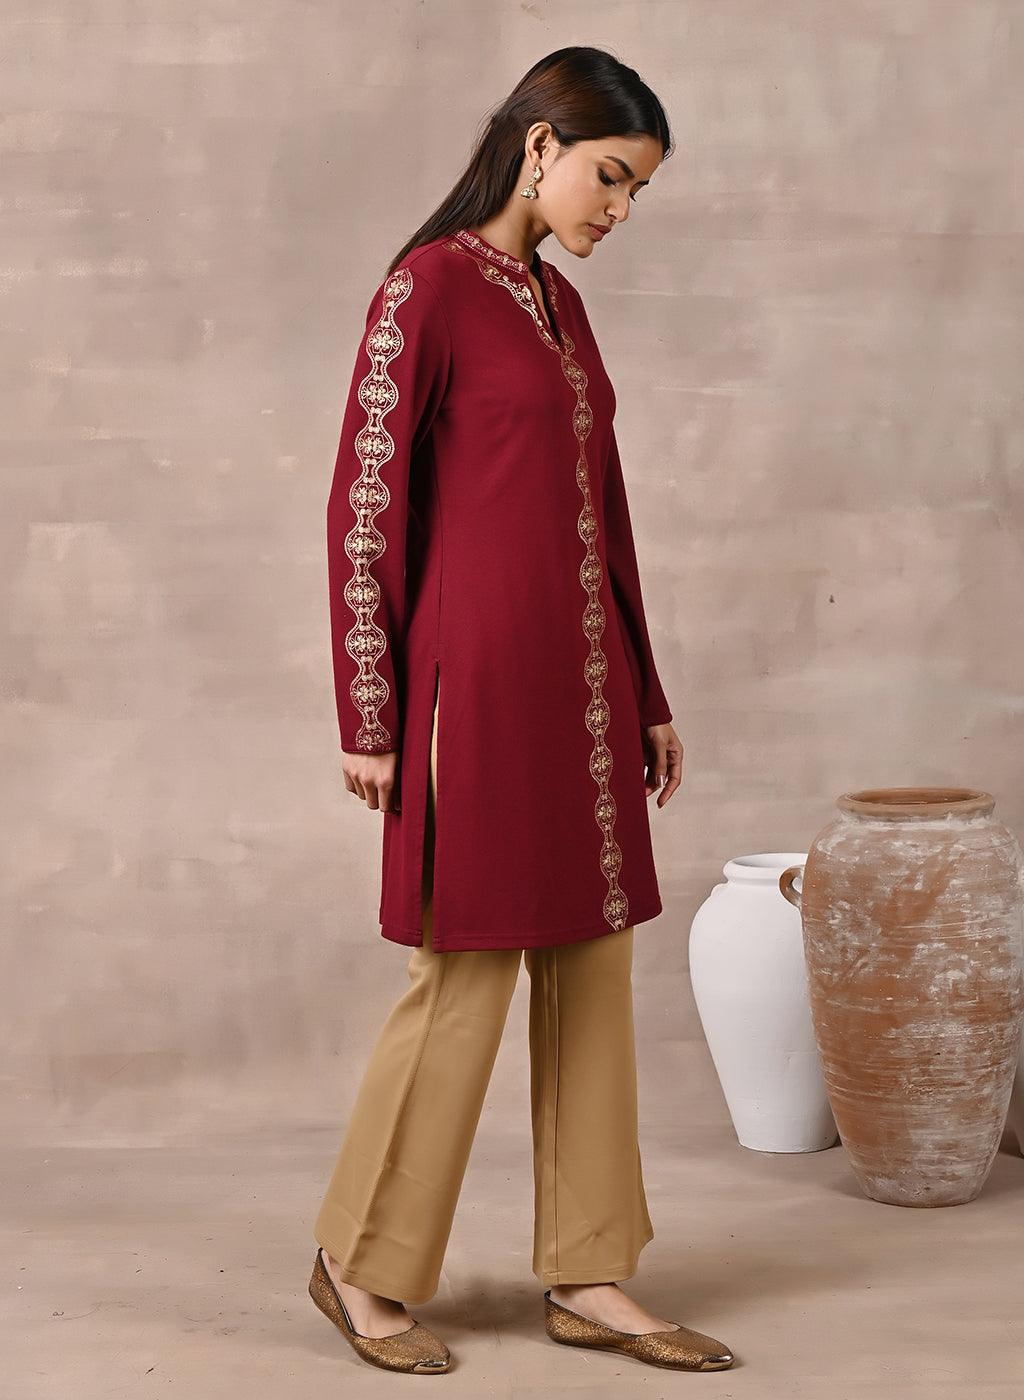 Latte Woolen Kurti from Kashmir with Paisley and Floral Aari Embroidery |  Exotic India Art